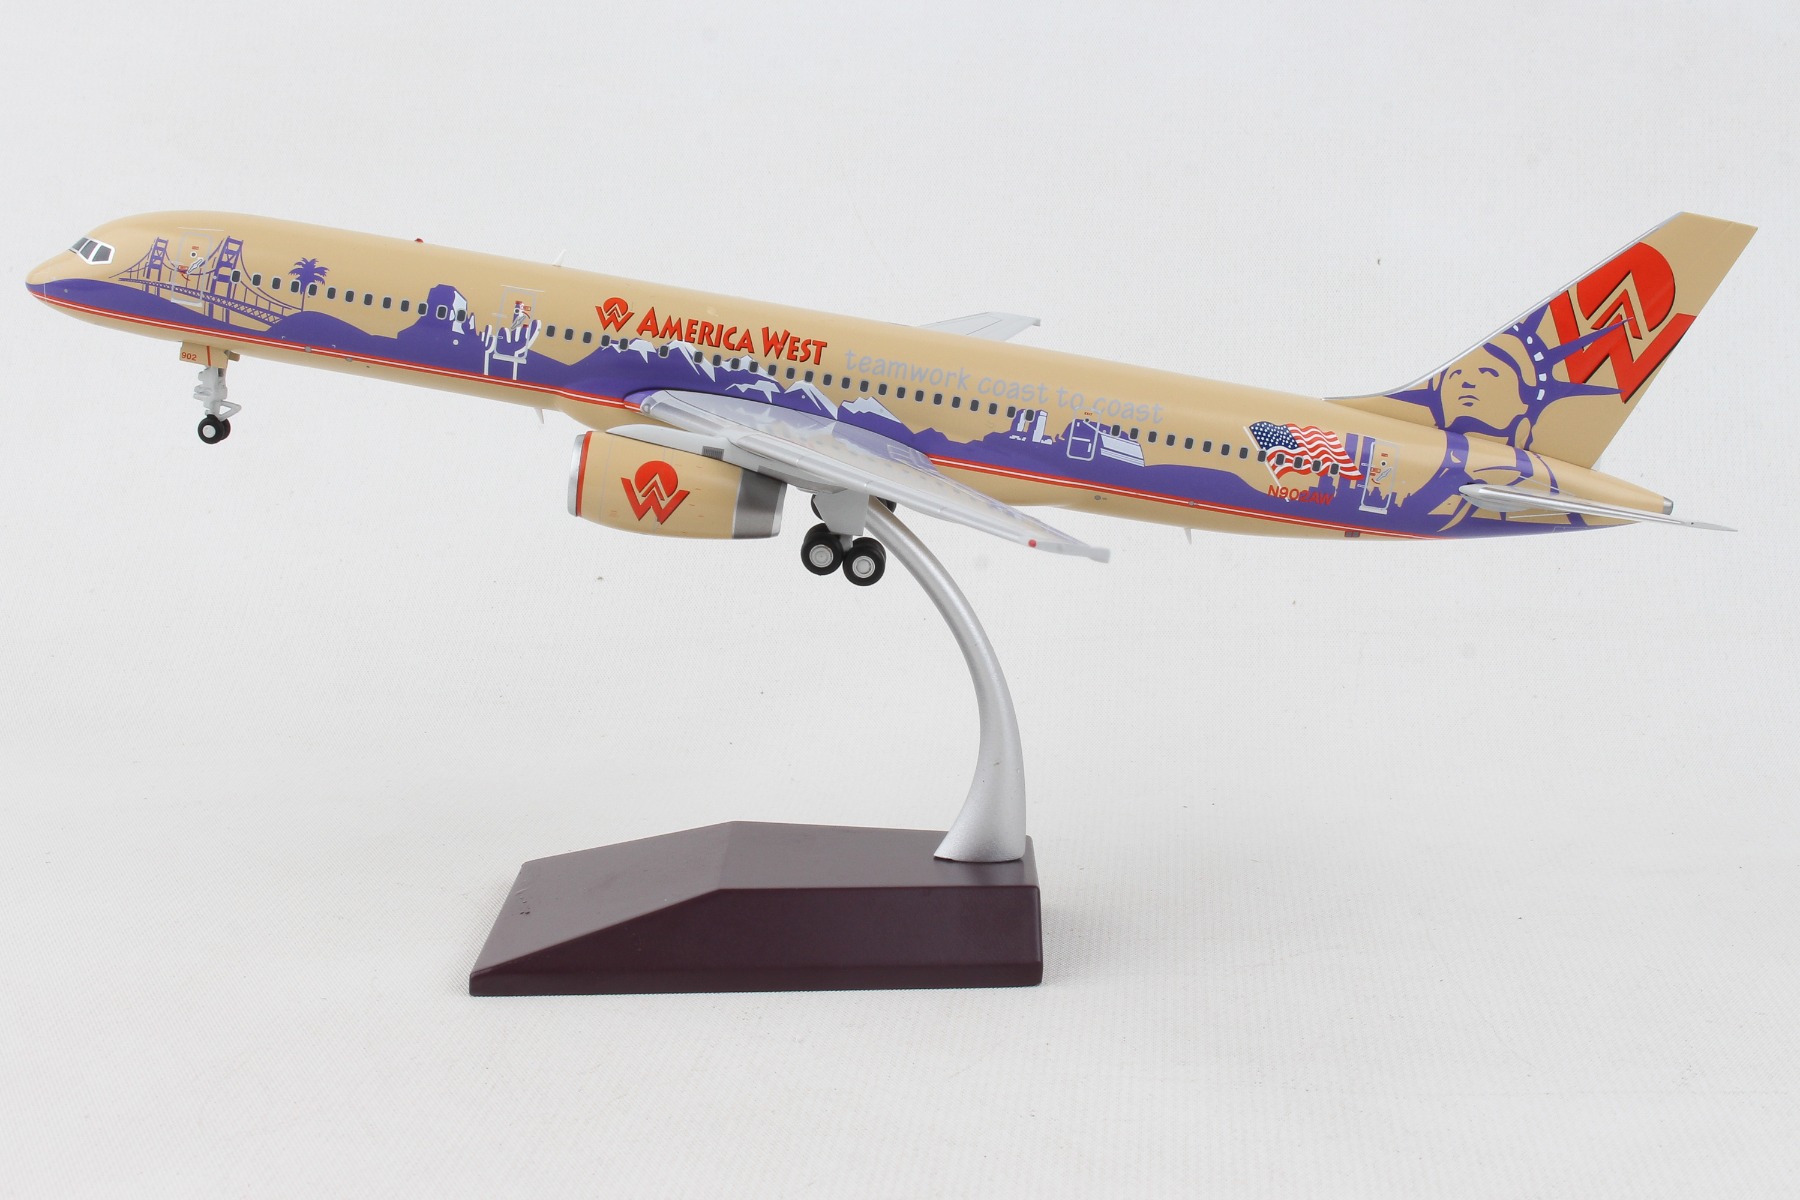 STARJETS 1:200 Scale AMERICA WEST AIRLINES A320 COMMERCIAL PLANE MODEL SJ_N650AW 